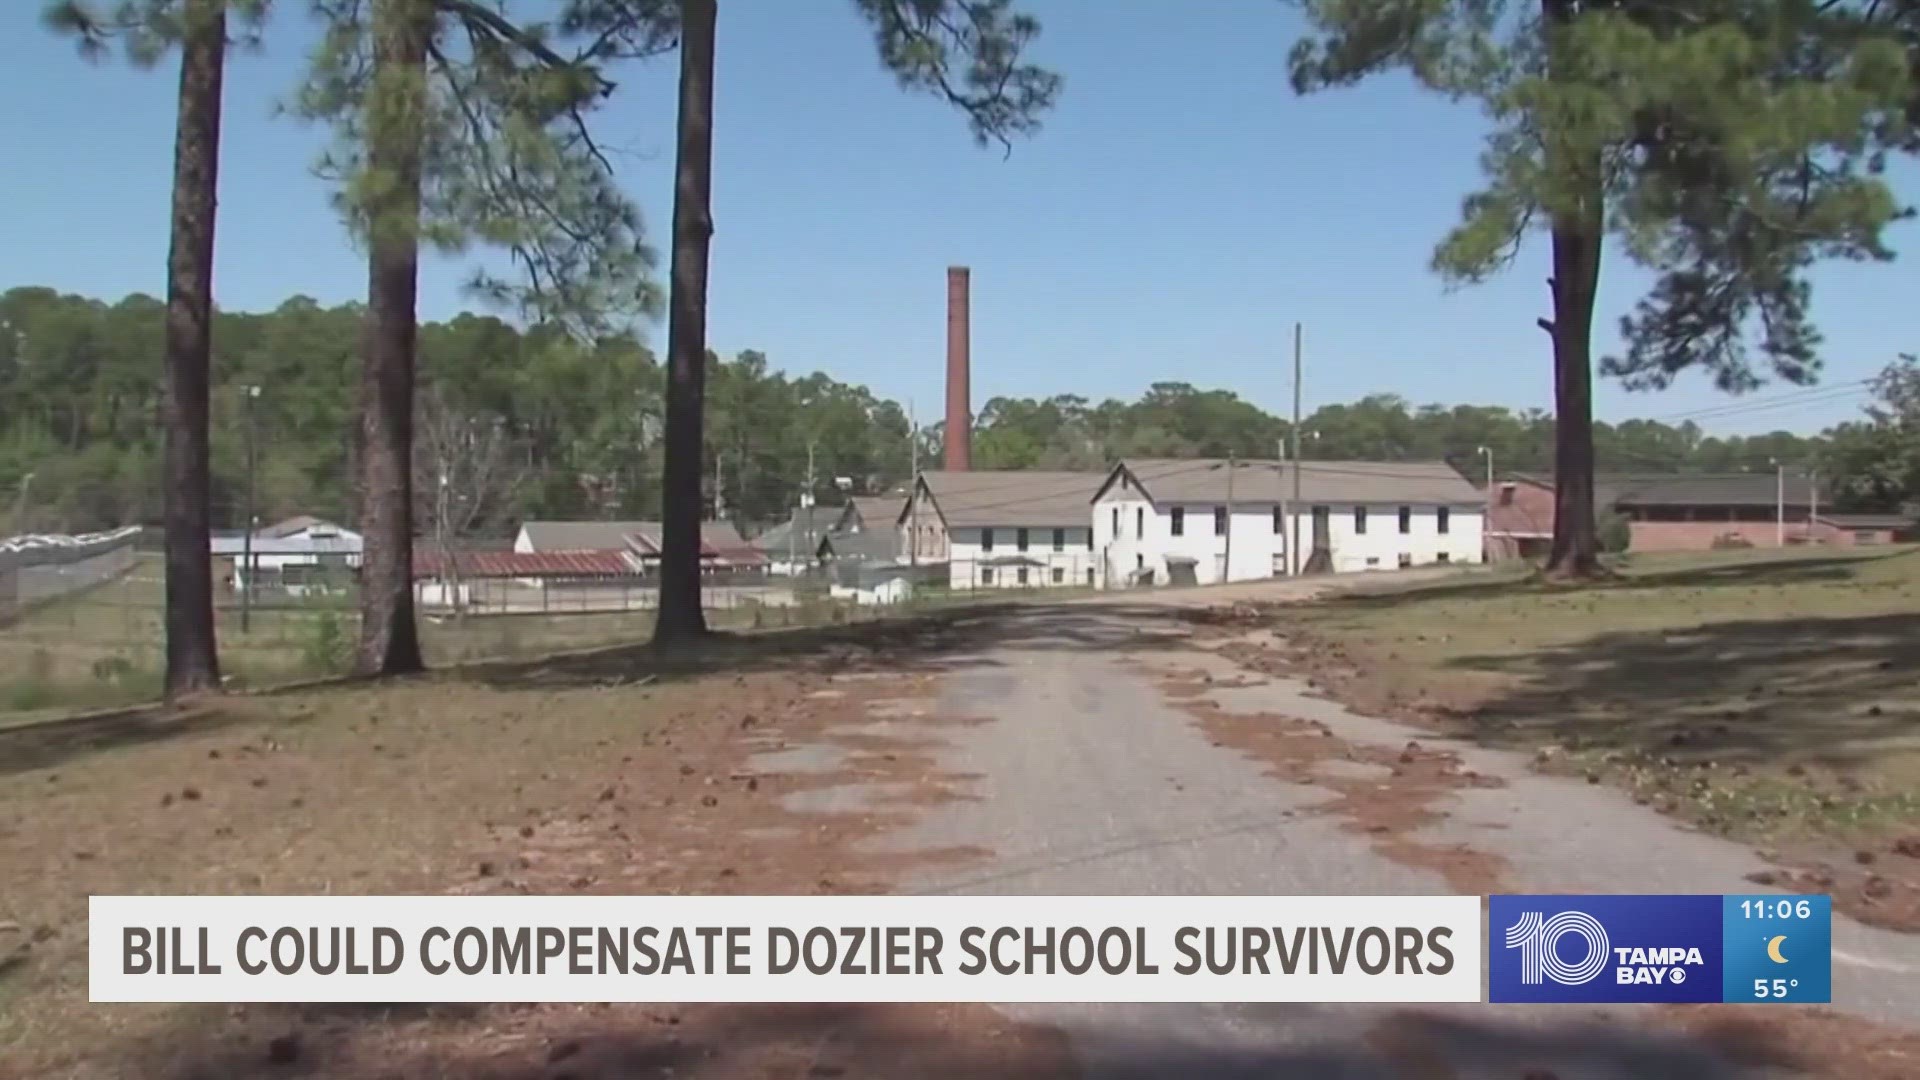 The bill would compensate survivors of the former state-run reform school.